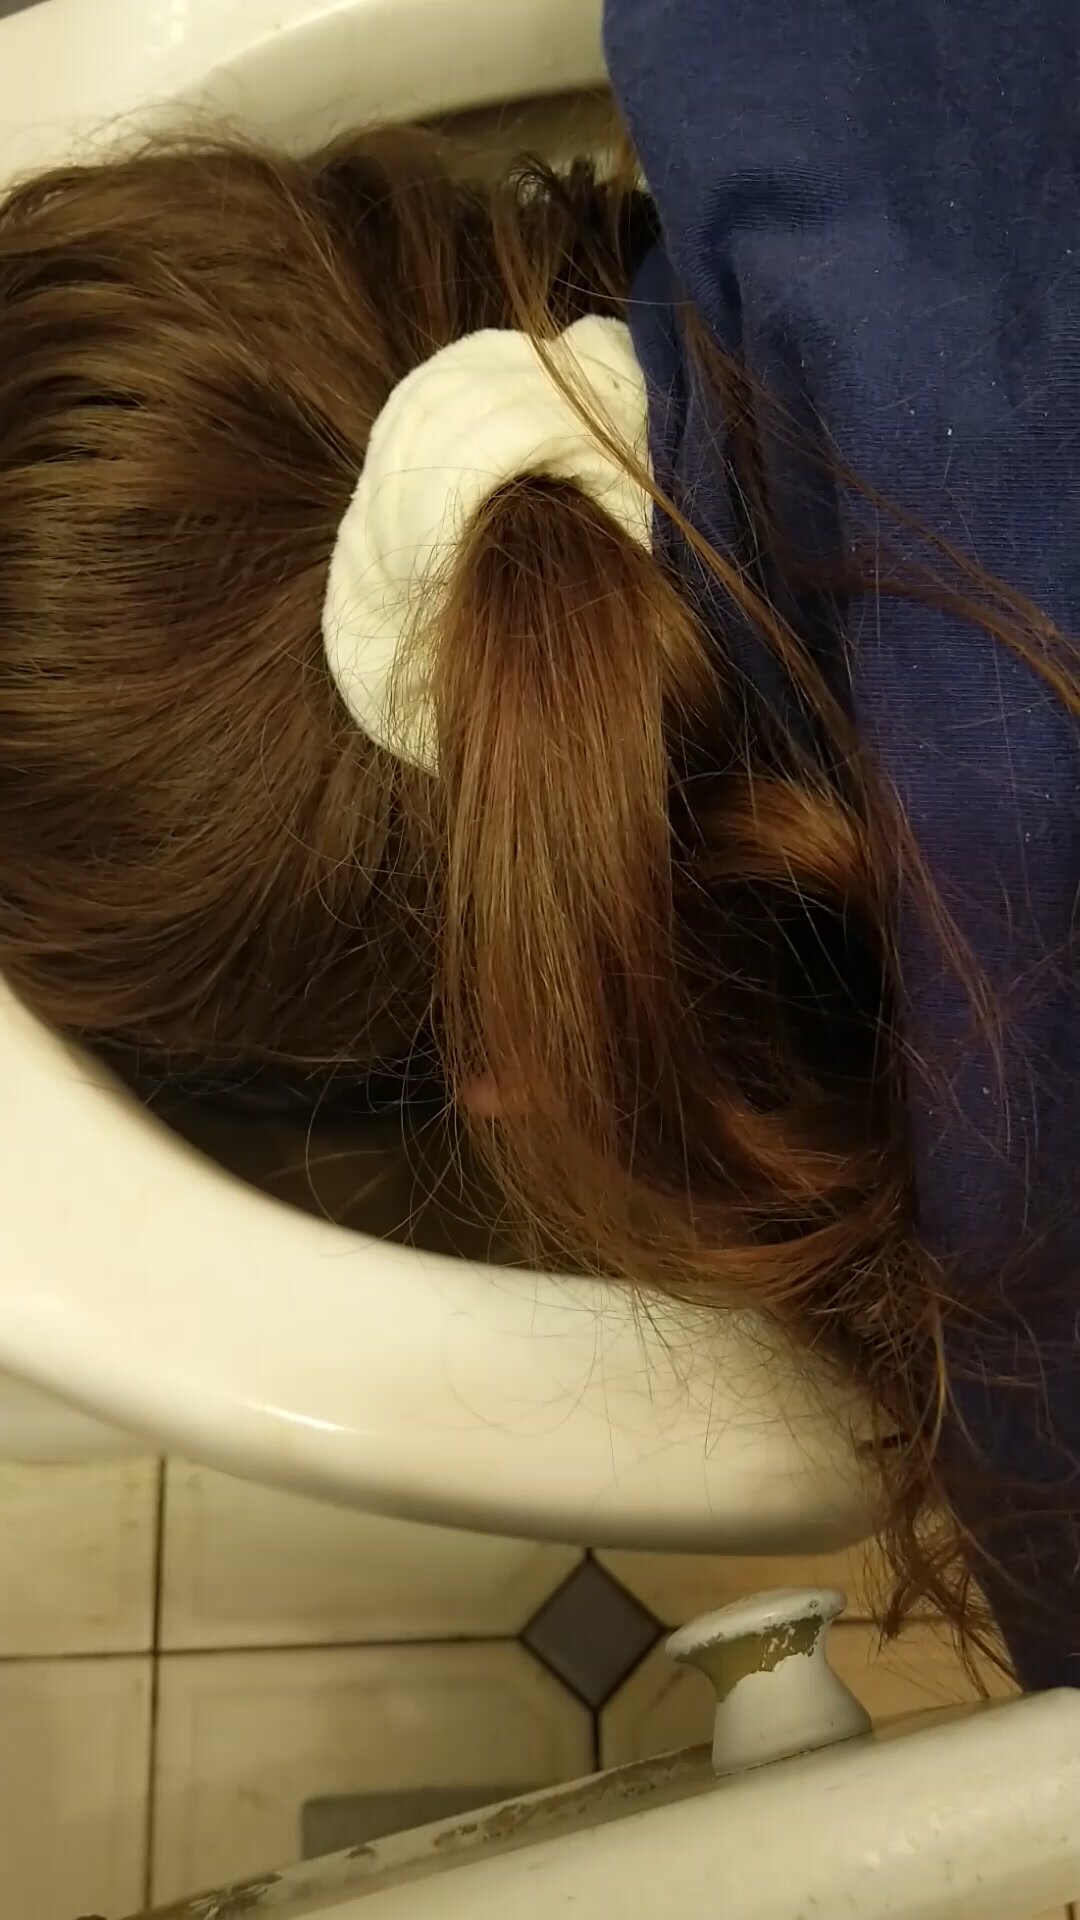 Dumb Trans Puppygirl Face Flushed In Shitty Toilet